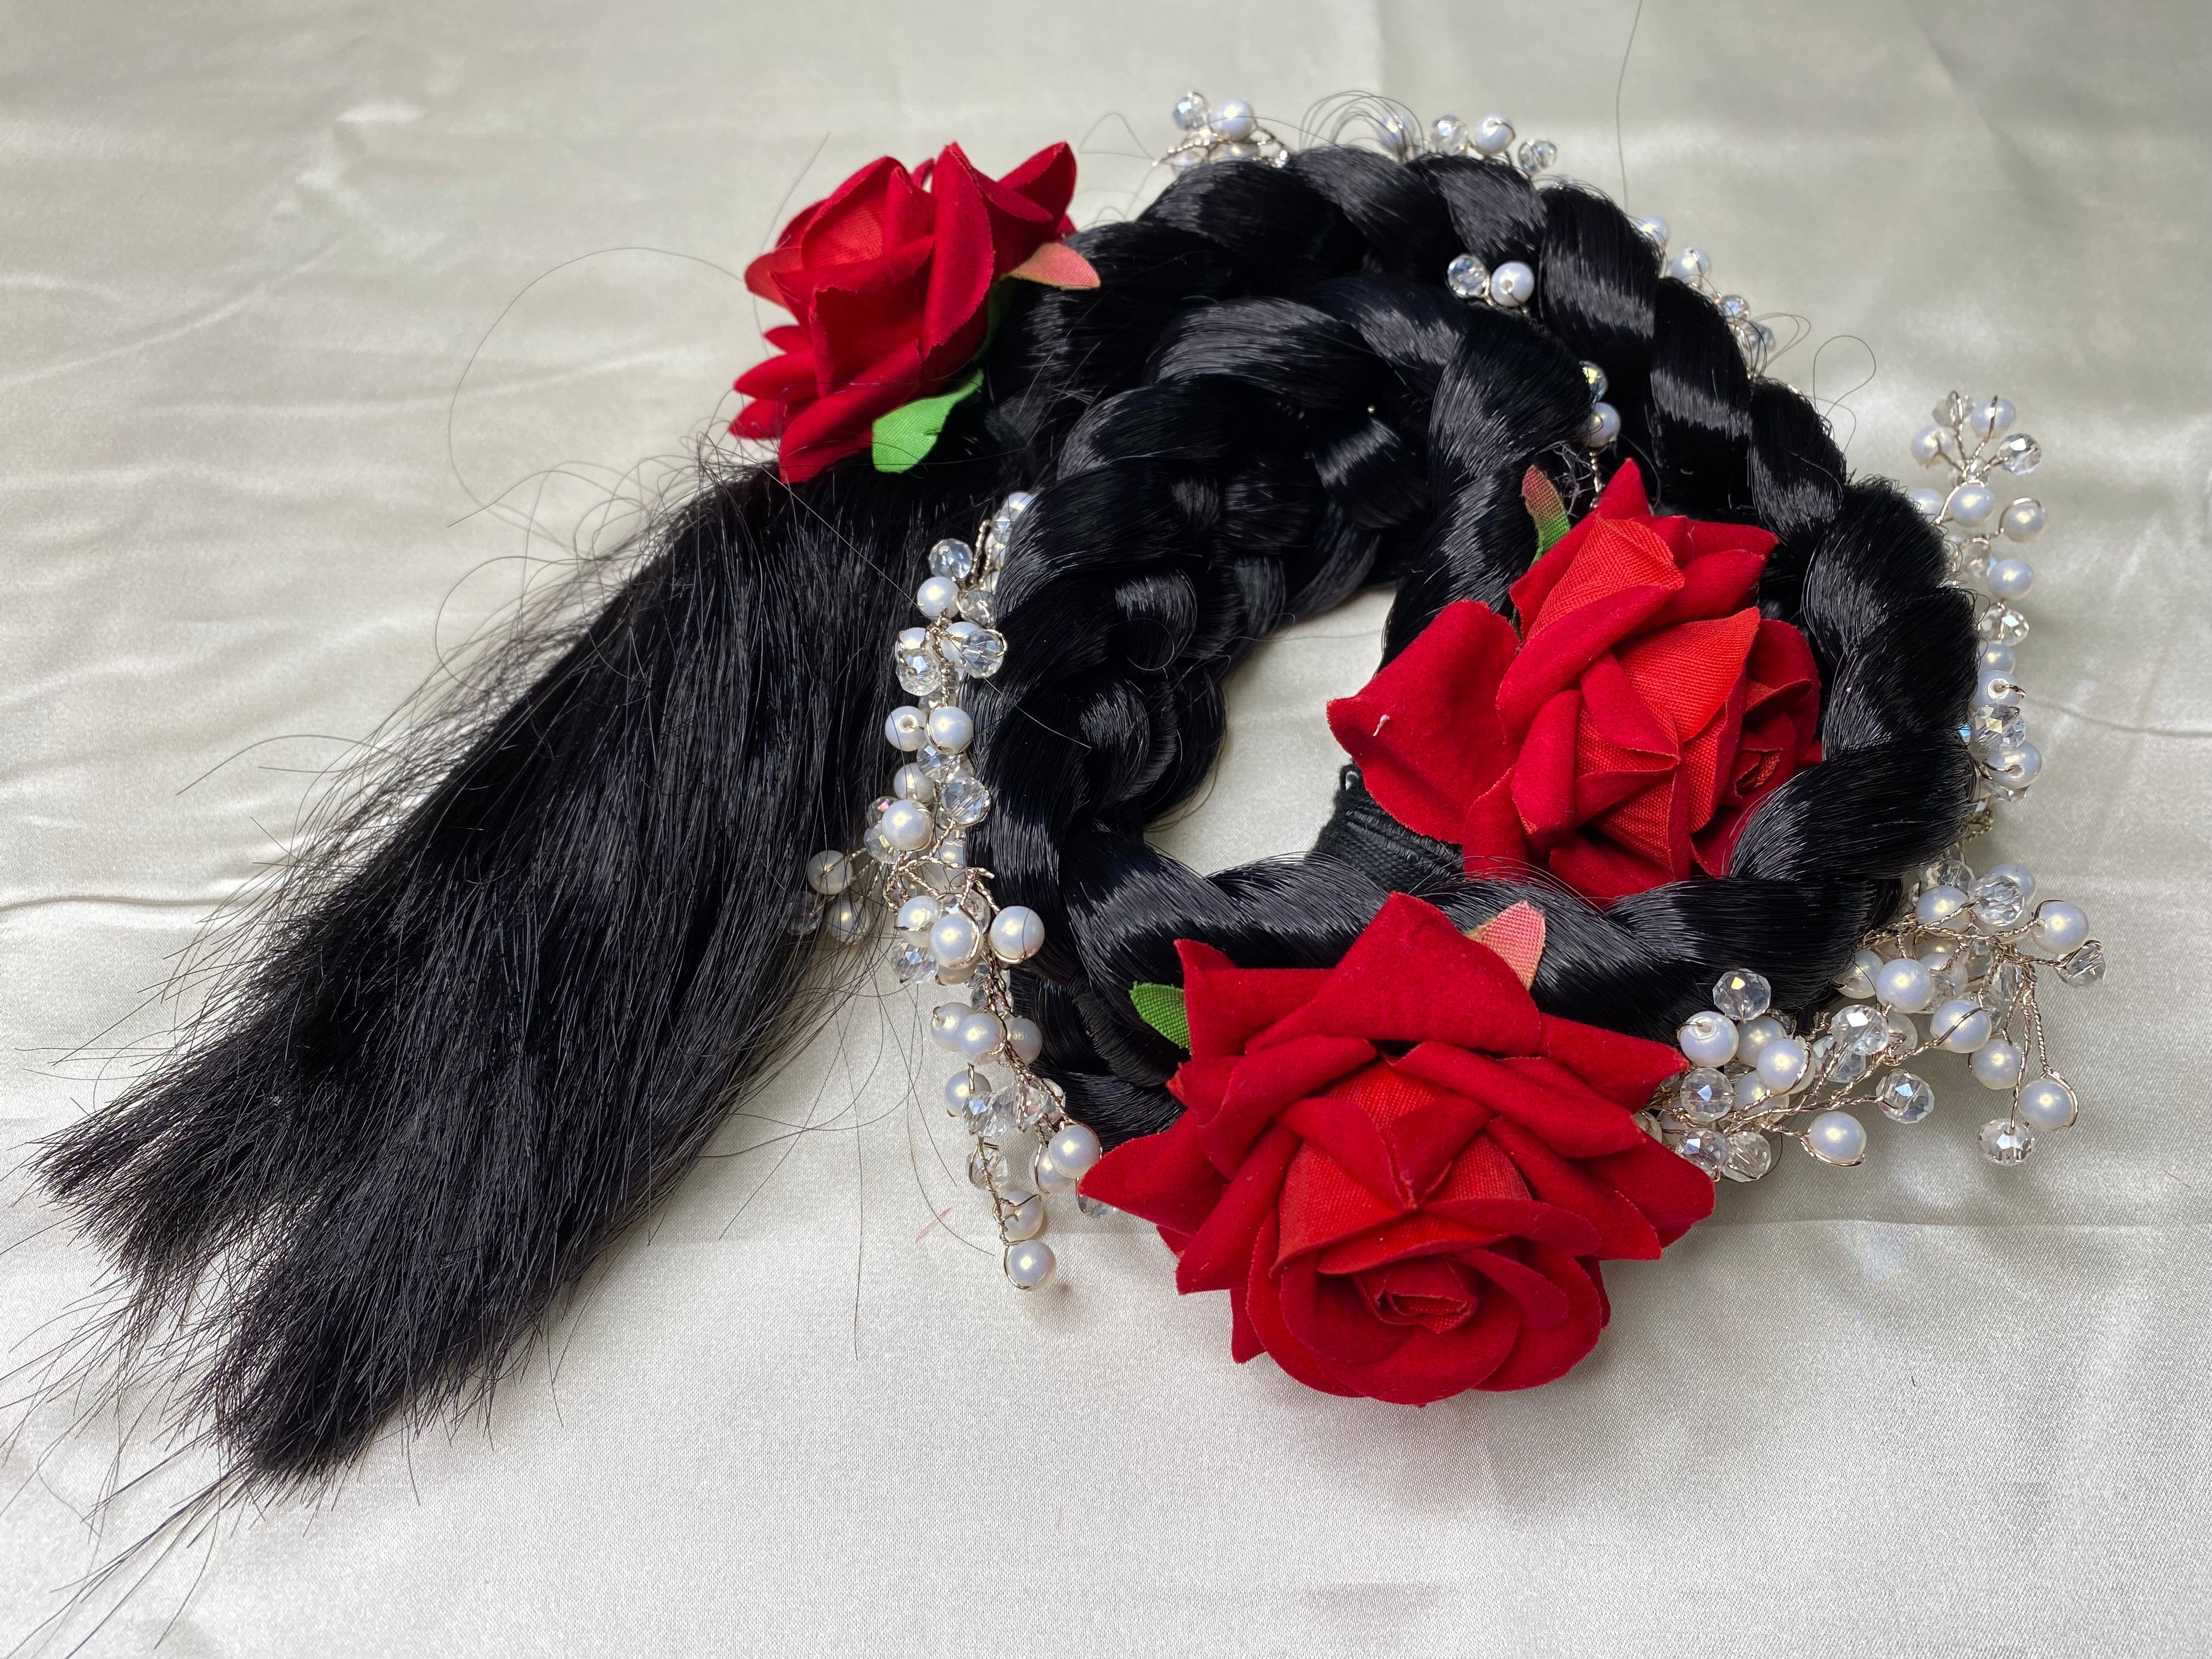 Hair accessories (Red rose)